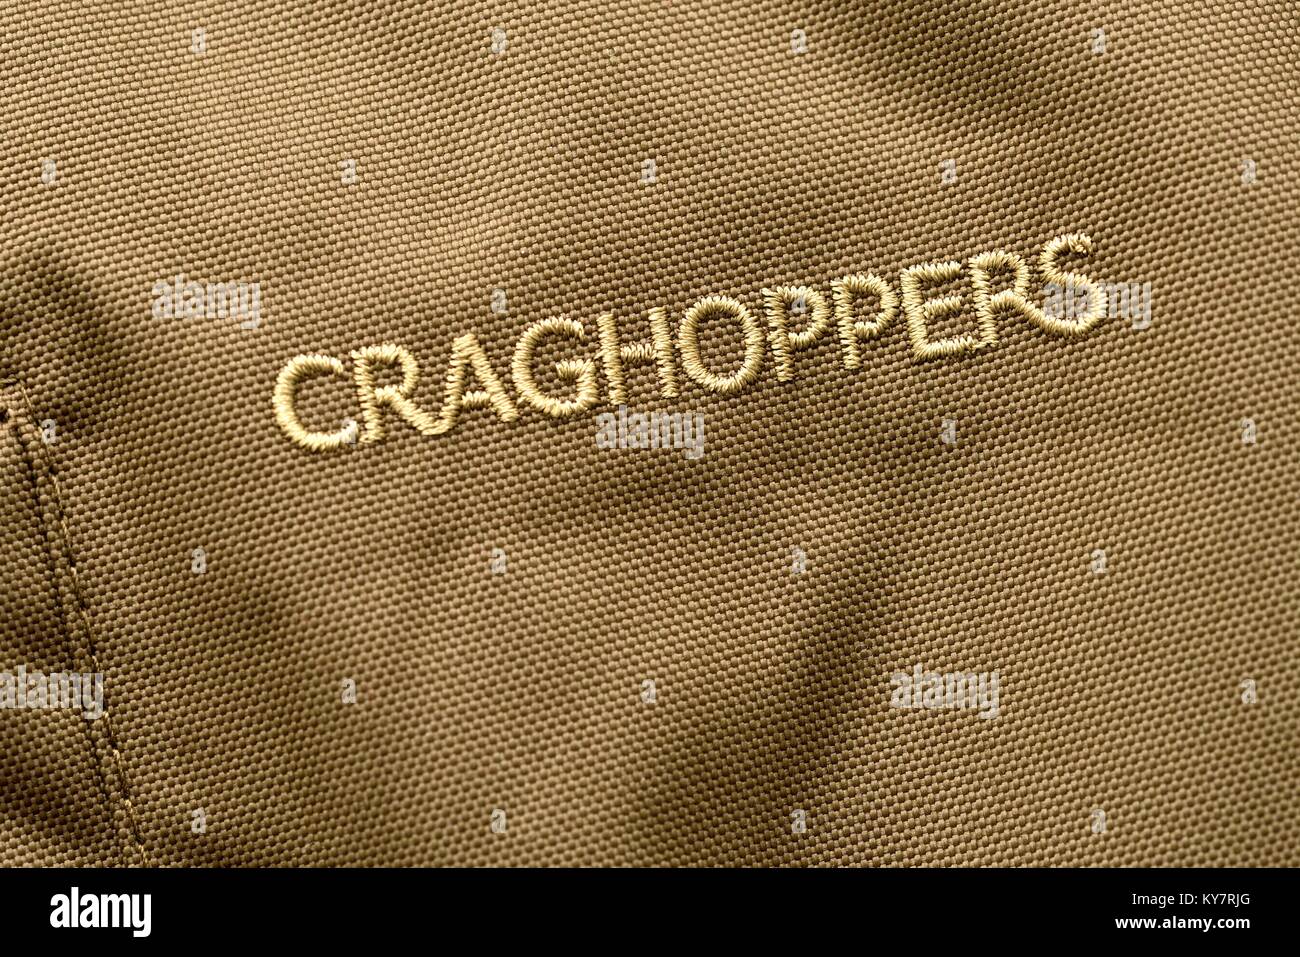 Craghoppers clothing brand Stock Photo